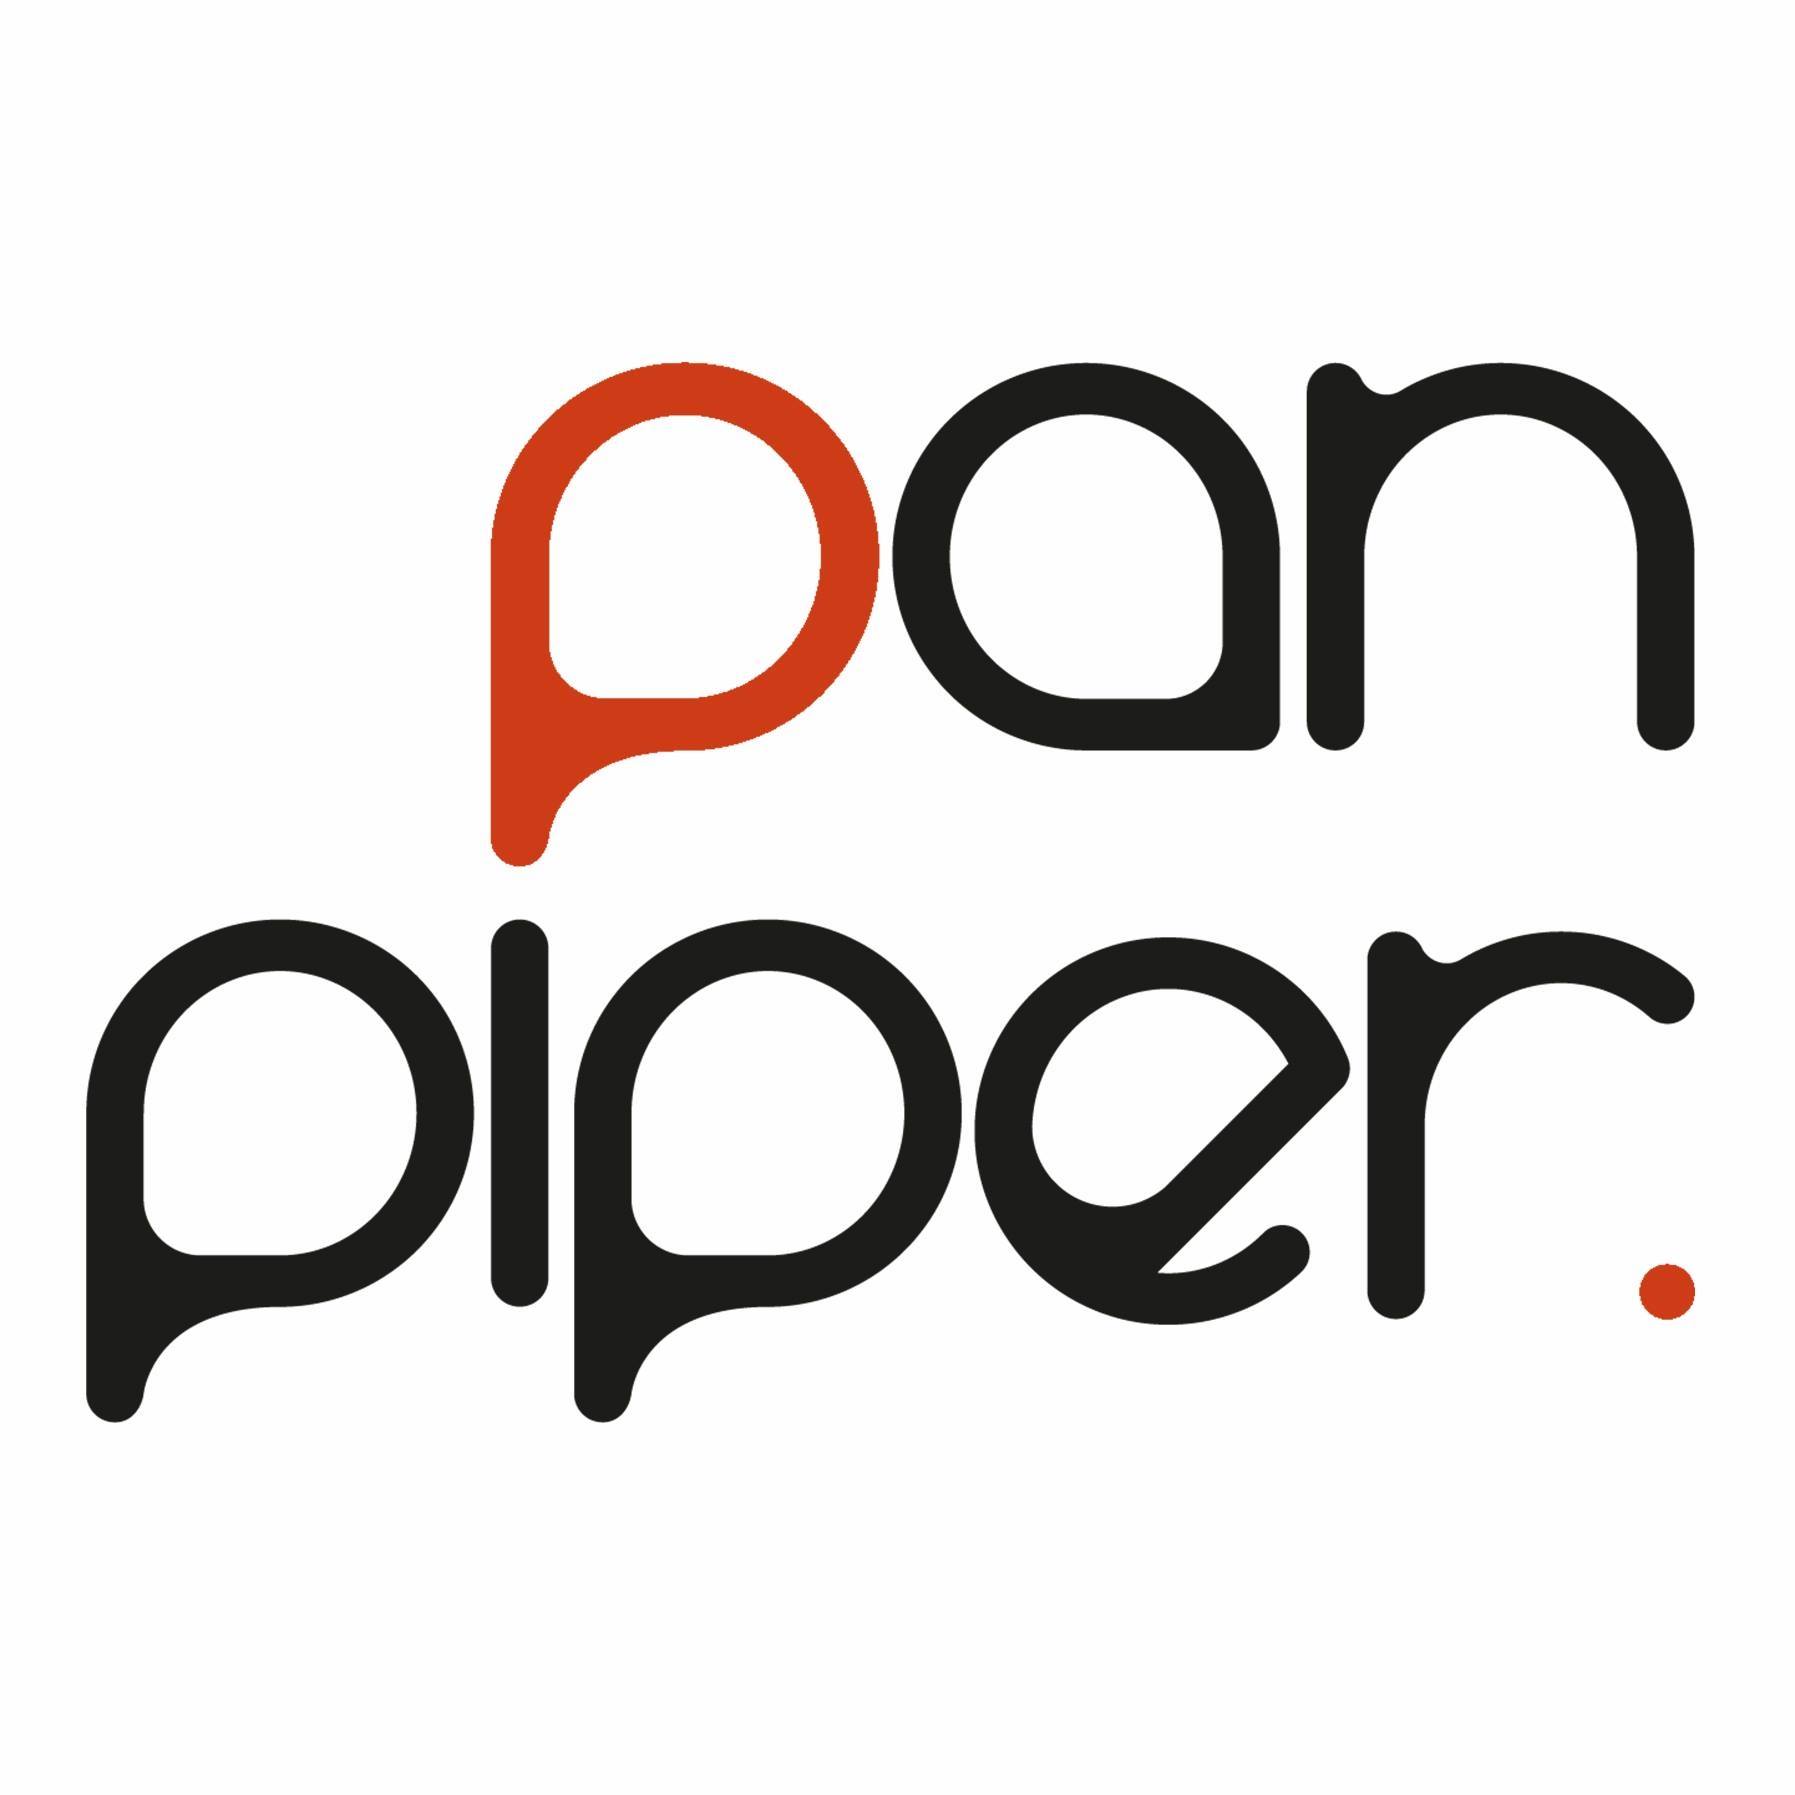 Pan Piper Tickets